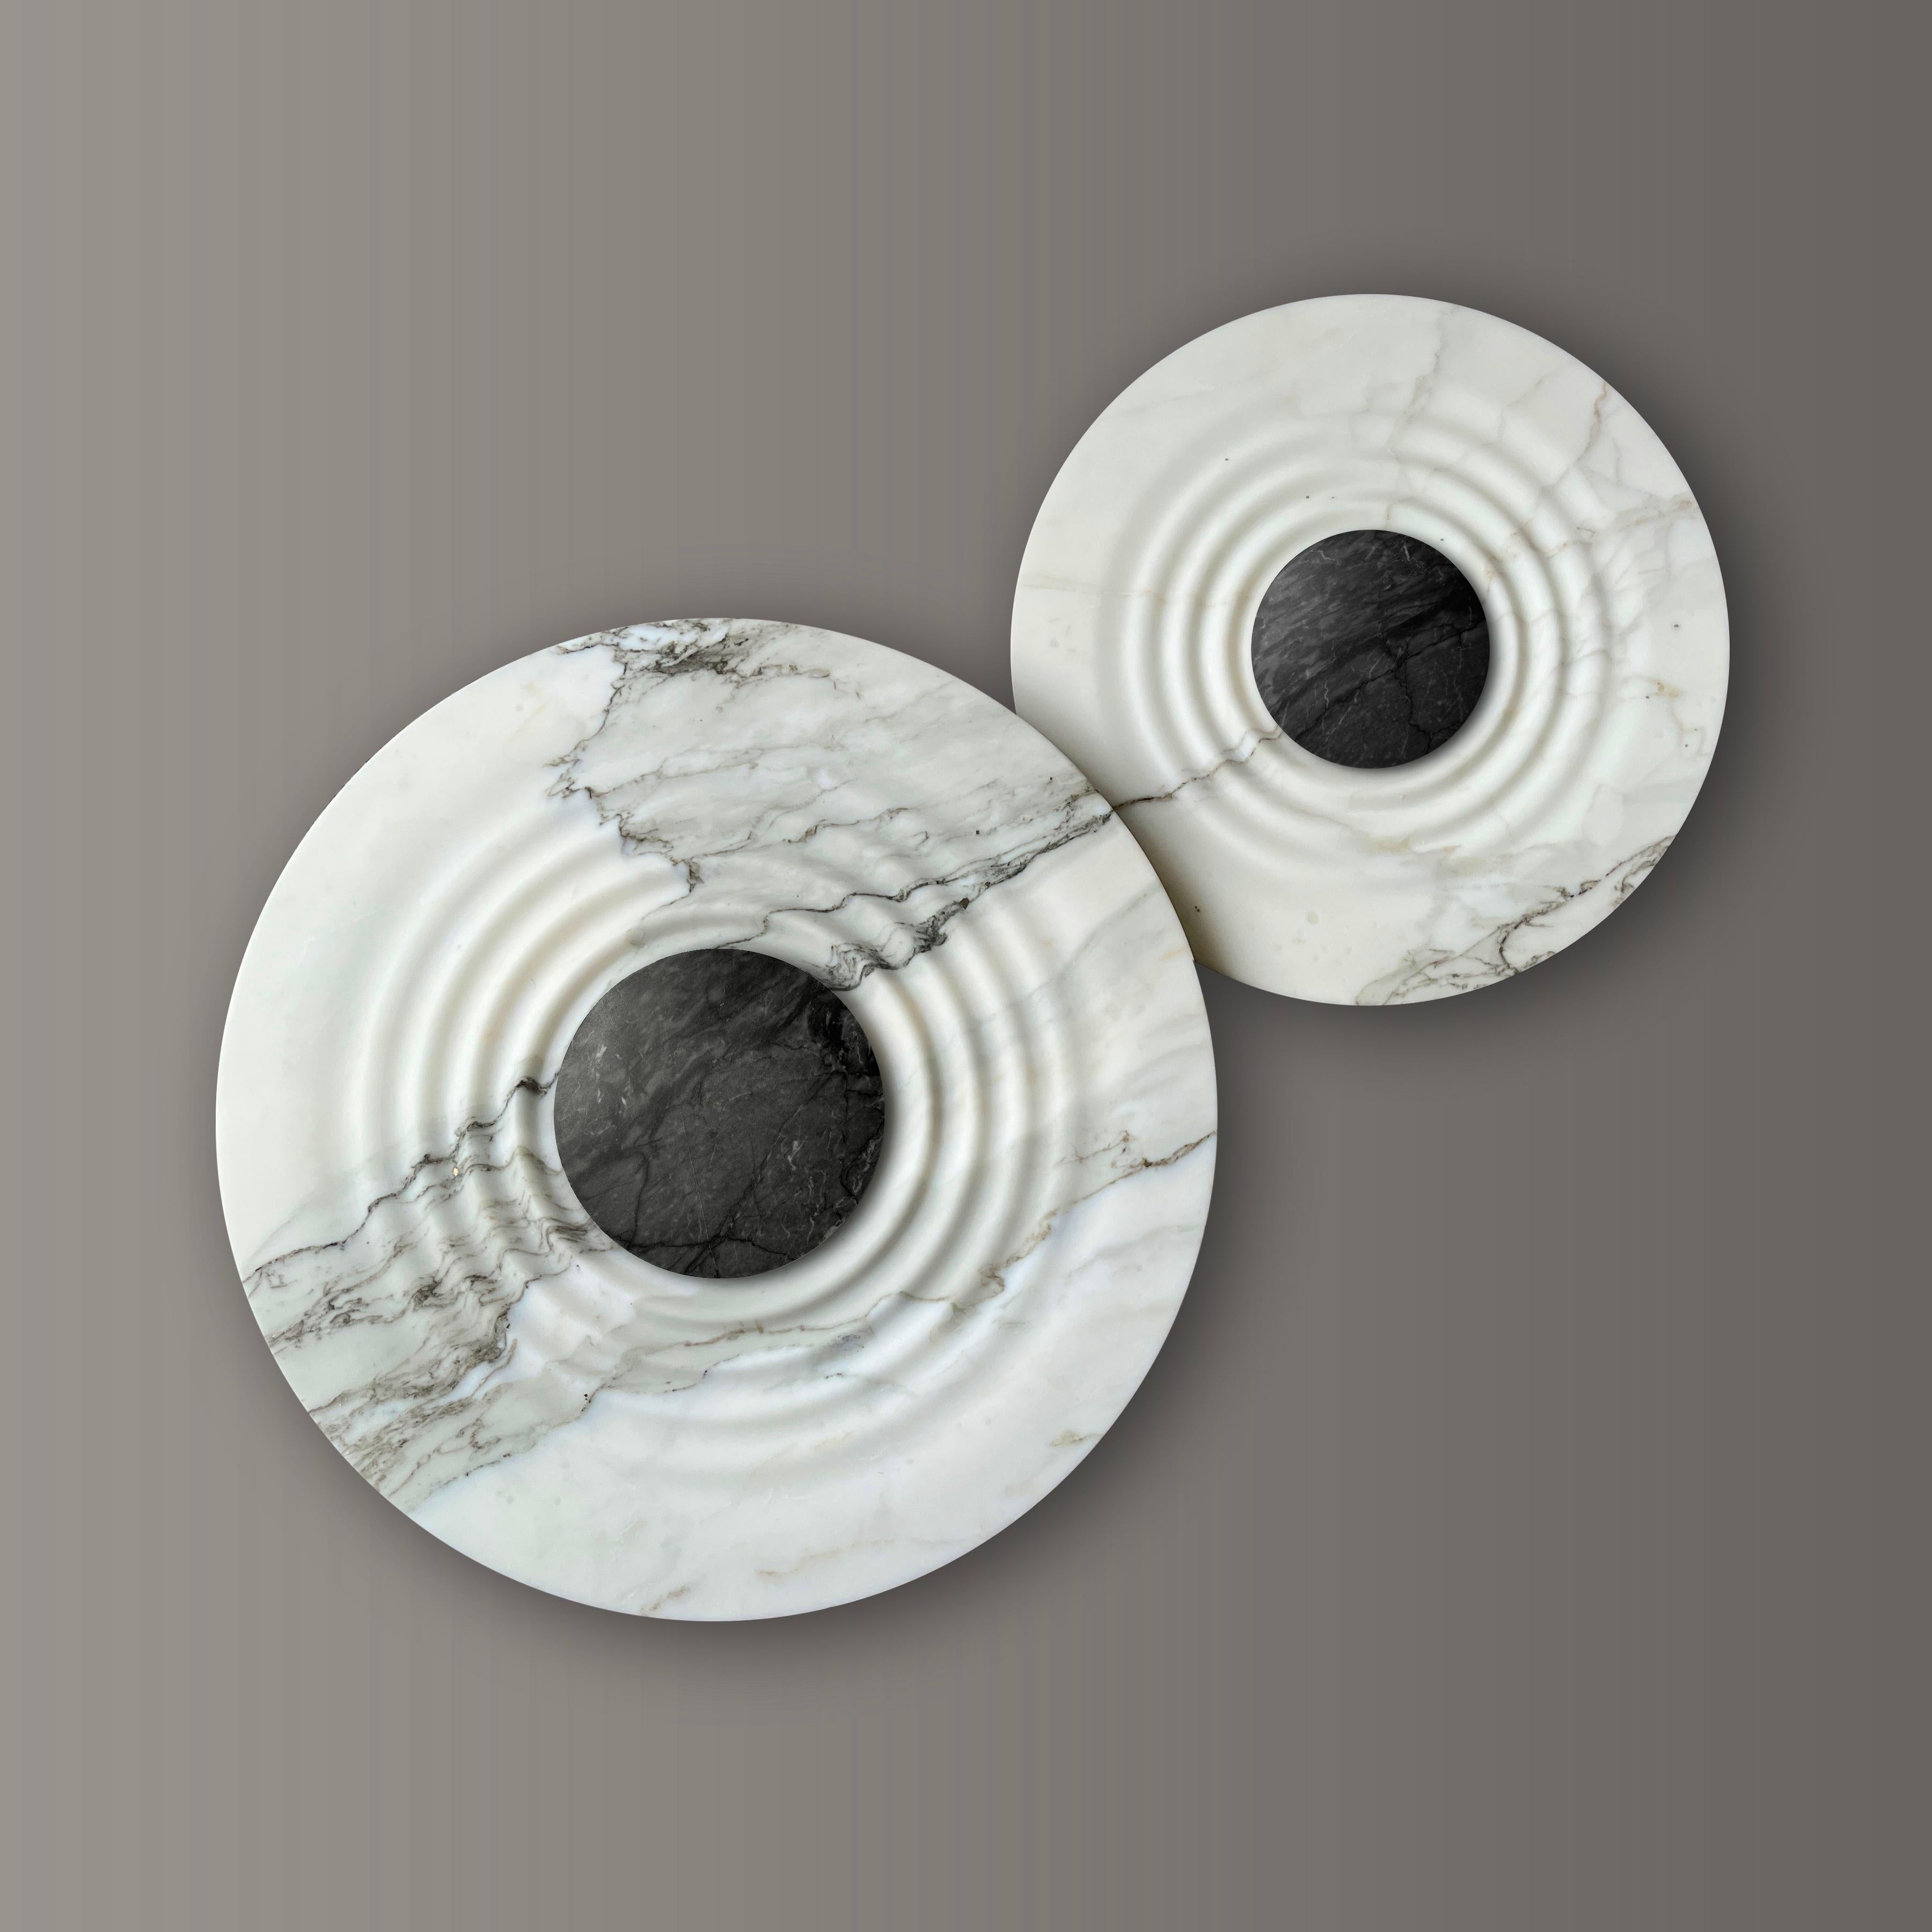 Set Of 2 Messier Marble Sconces by Etamorph
Dimensions: Large: Ø 50 x D 10 cm.
Small: Ø 38 x D 10 cm.
Materials: Calacata Marble and Black Matter stone.

Available in Ø 50 and Ø 38 cm. All our lamps can be wired according to each country. If sold to